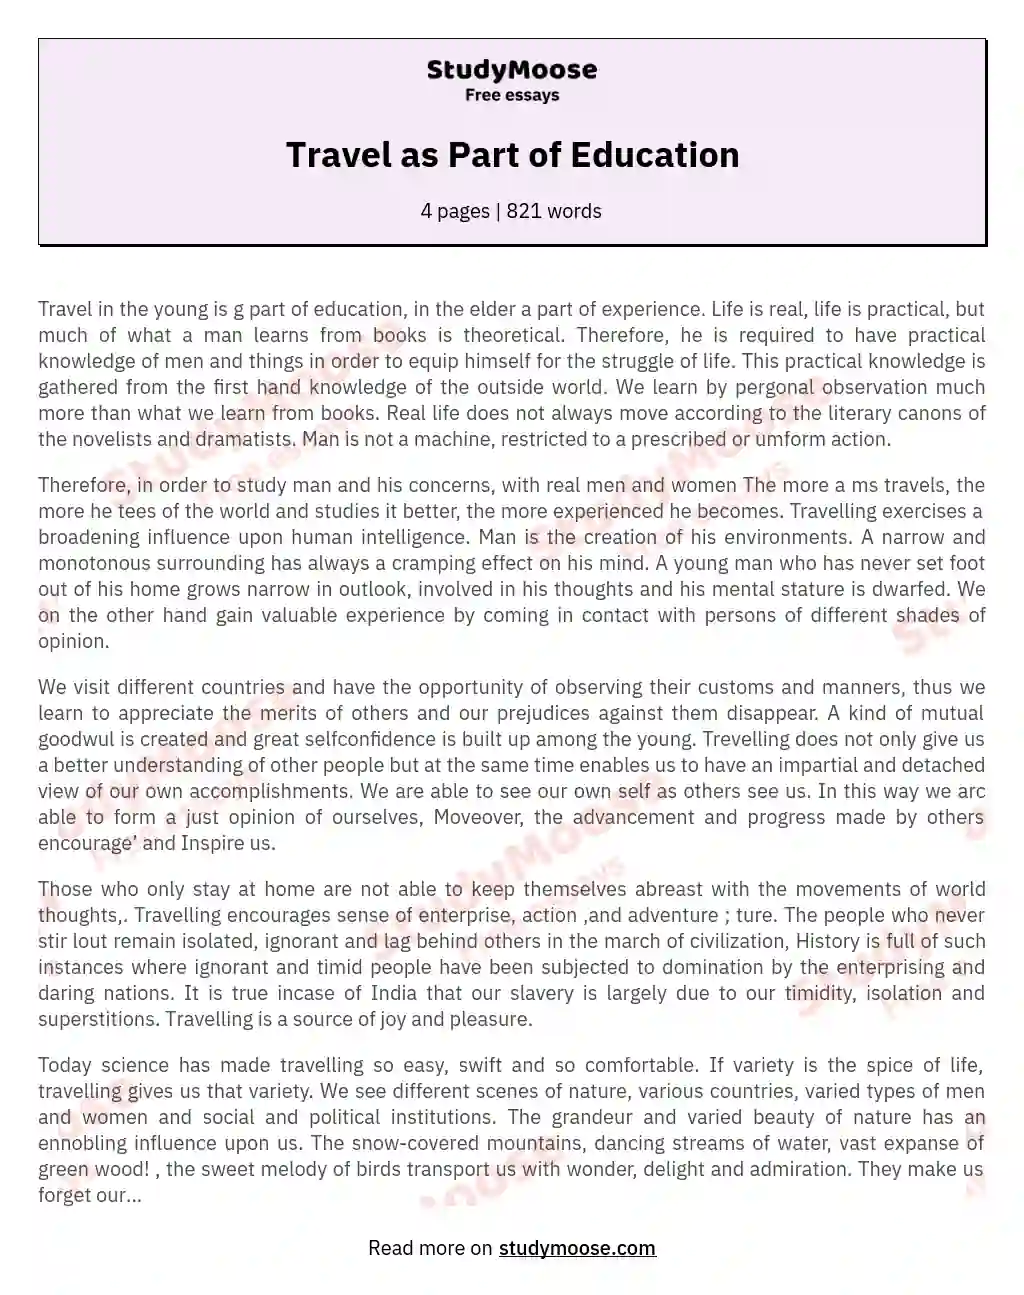 Travel as Part of Education essay